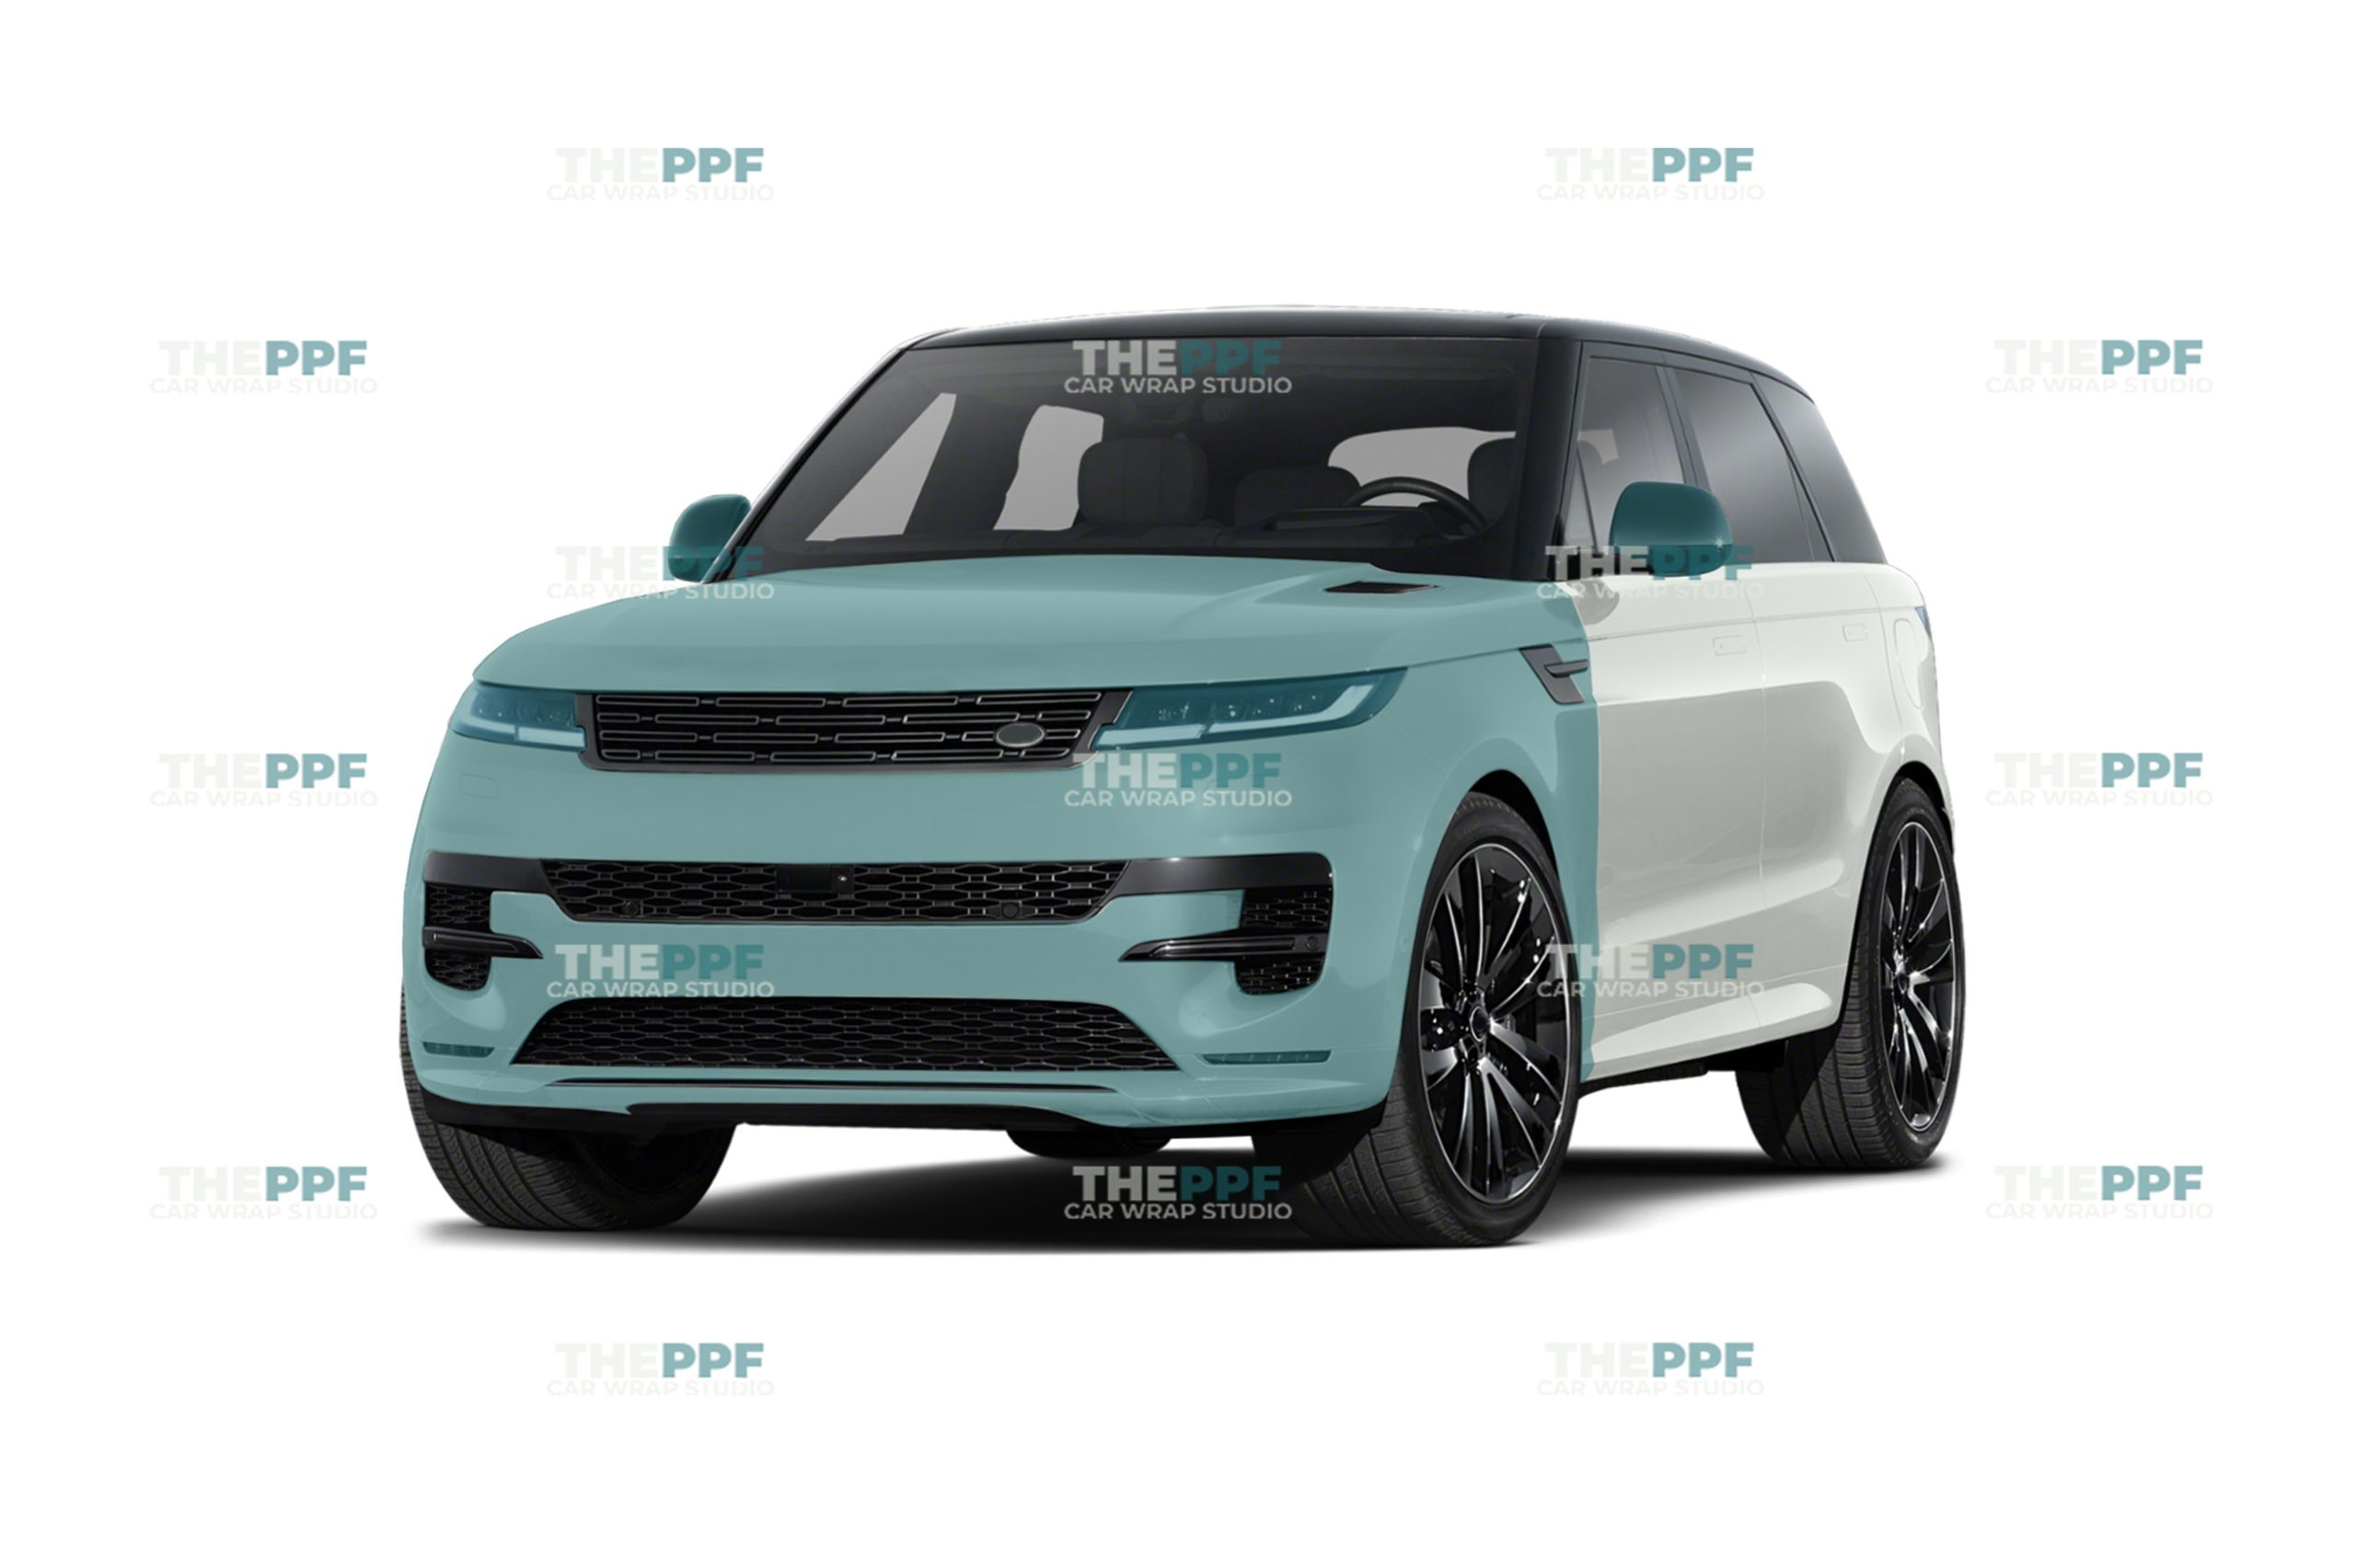 the ppf range rover paint protection auckland